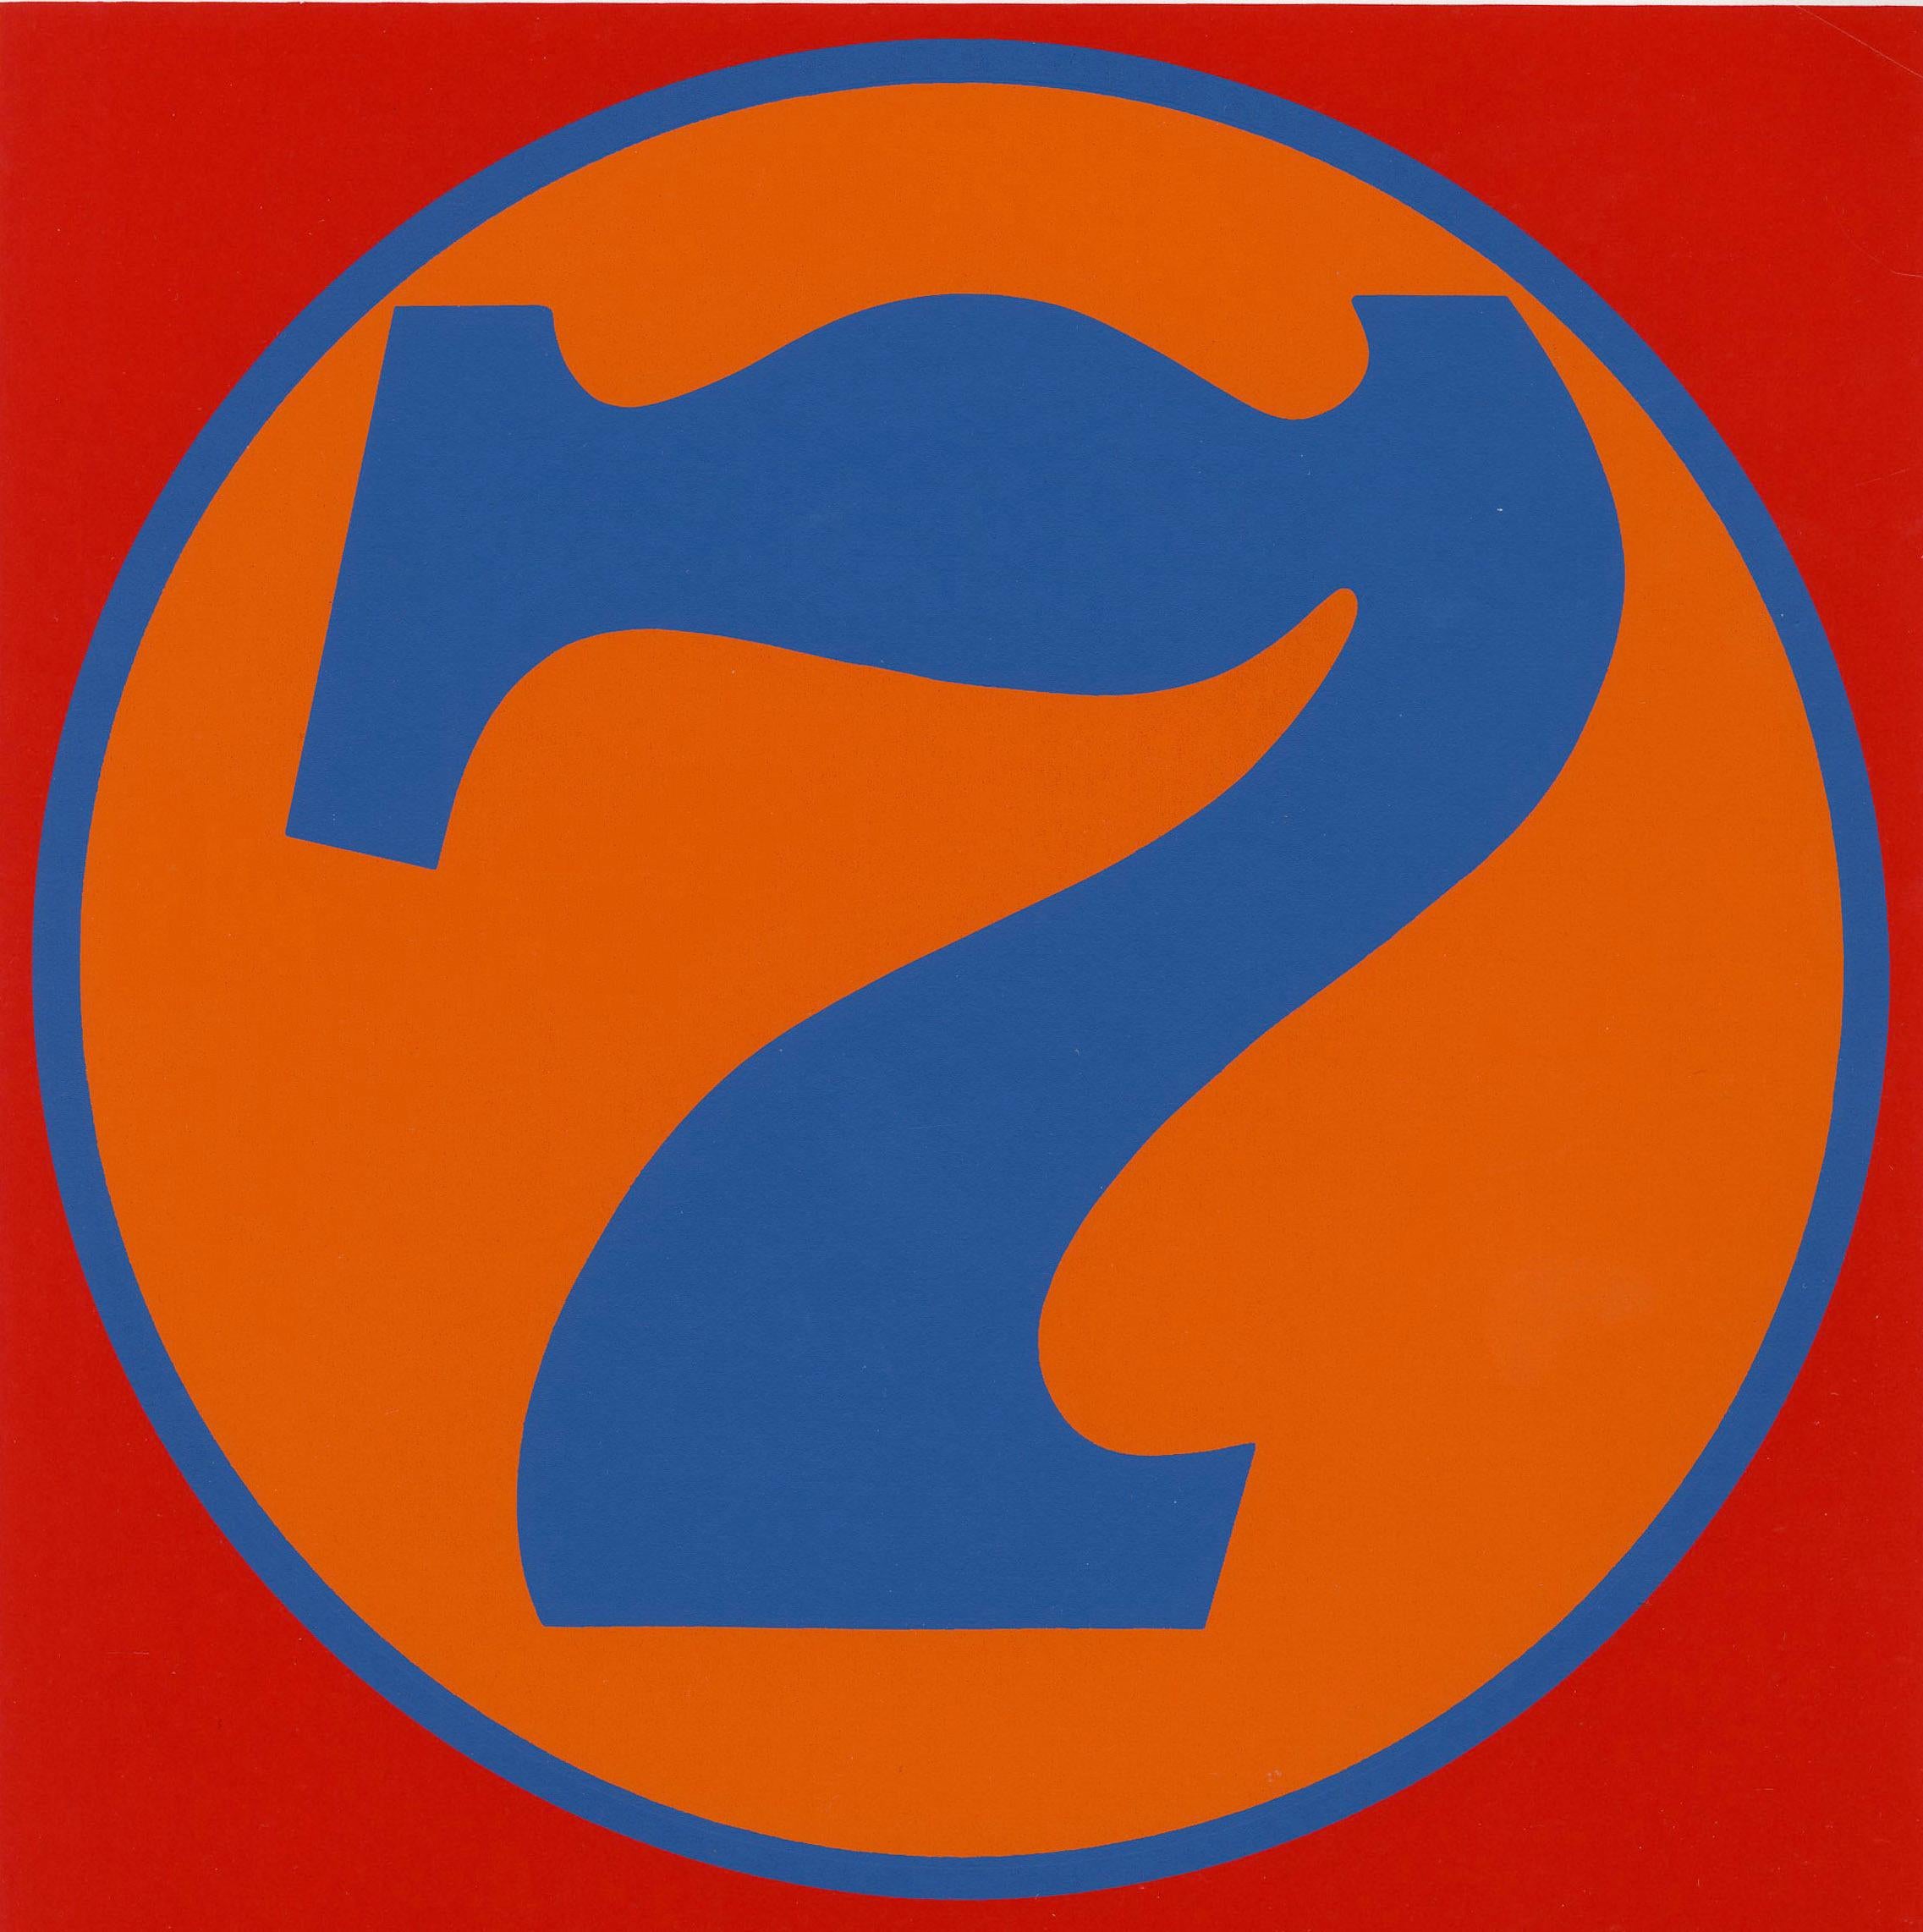 Seven - Print by Robert Indiana